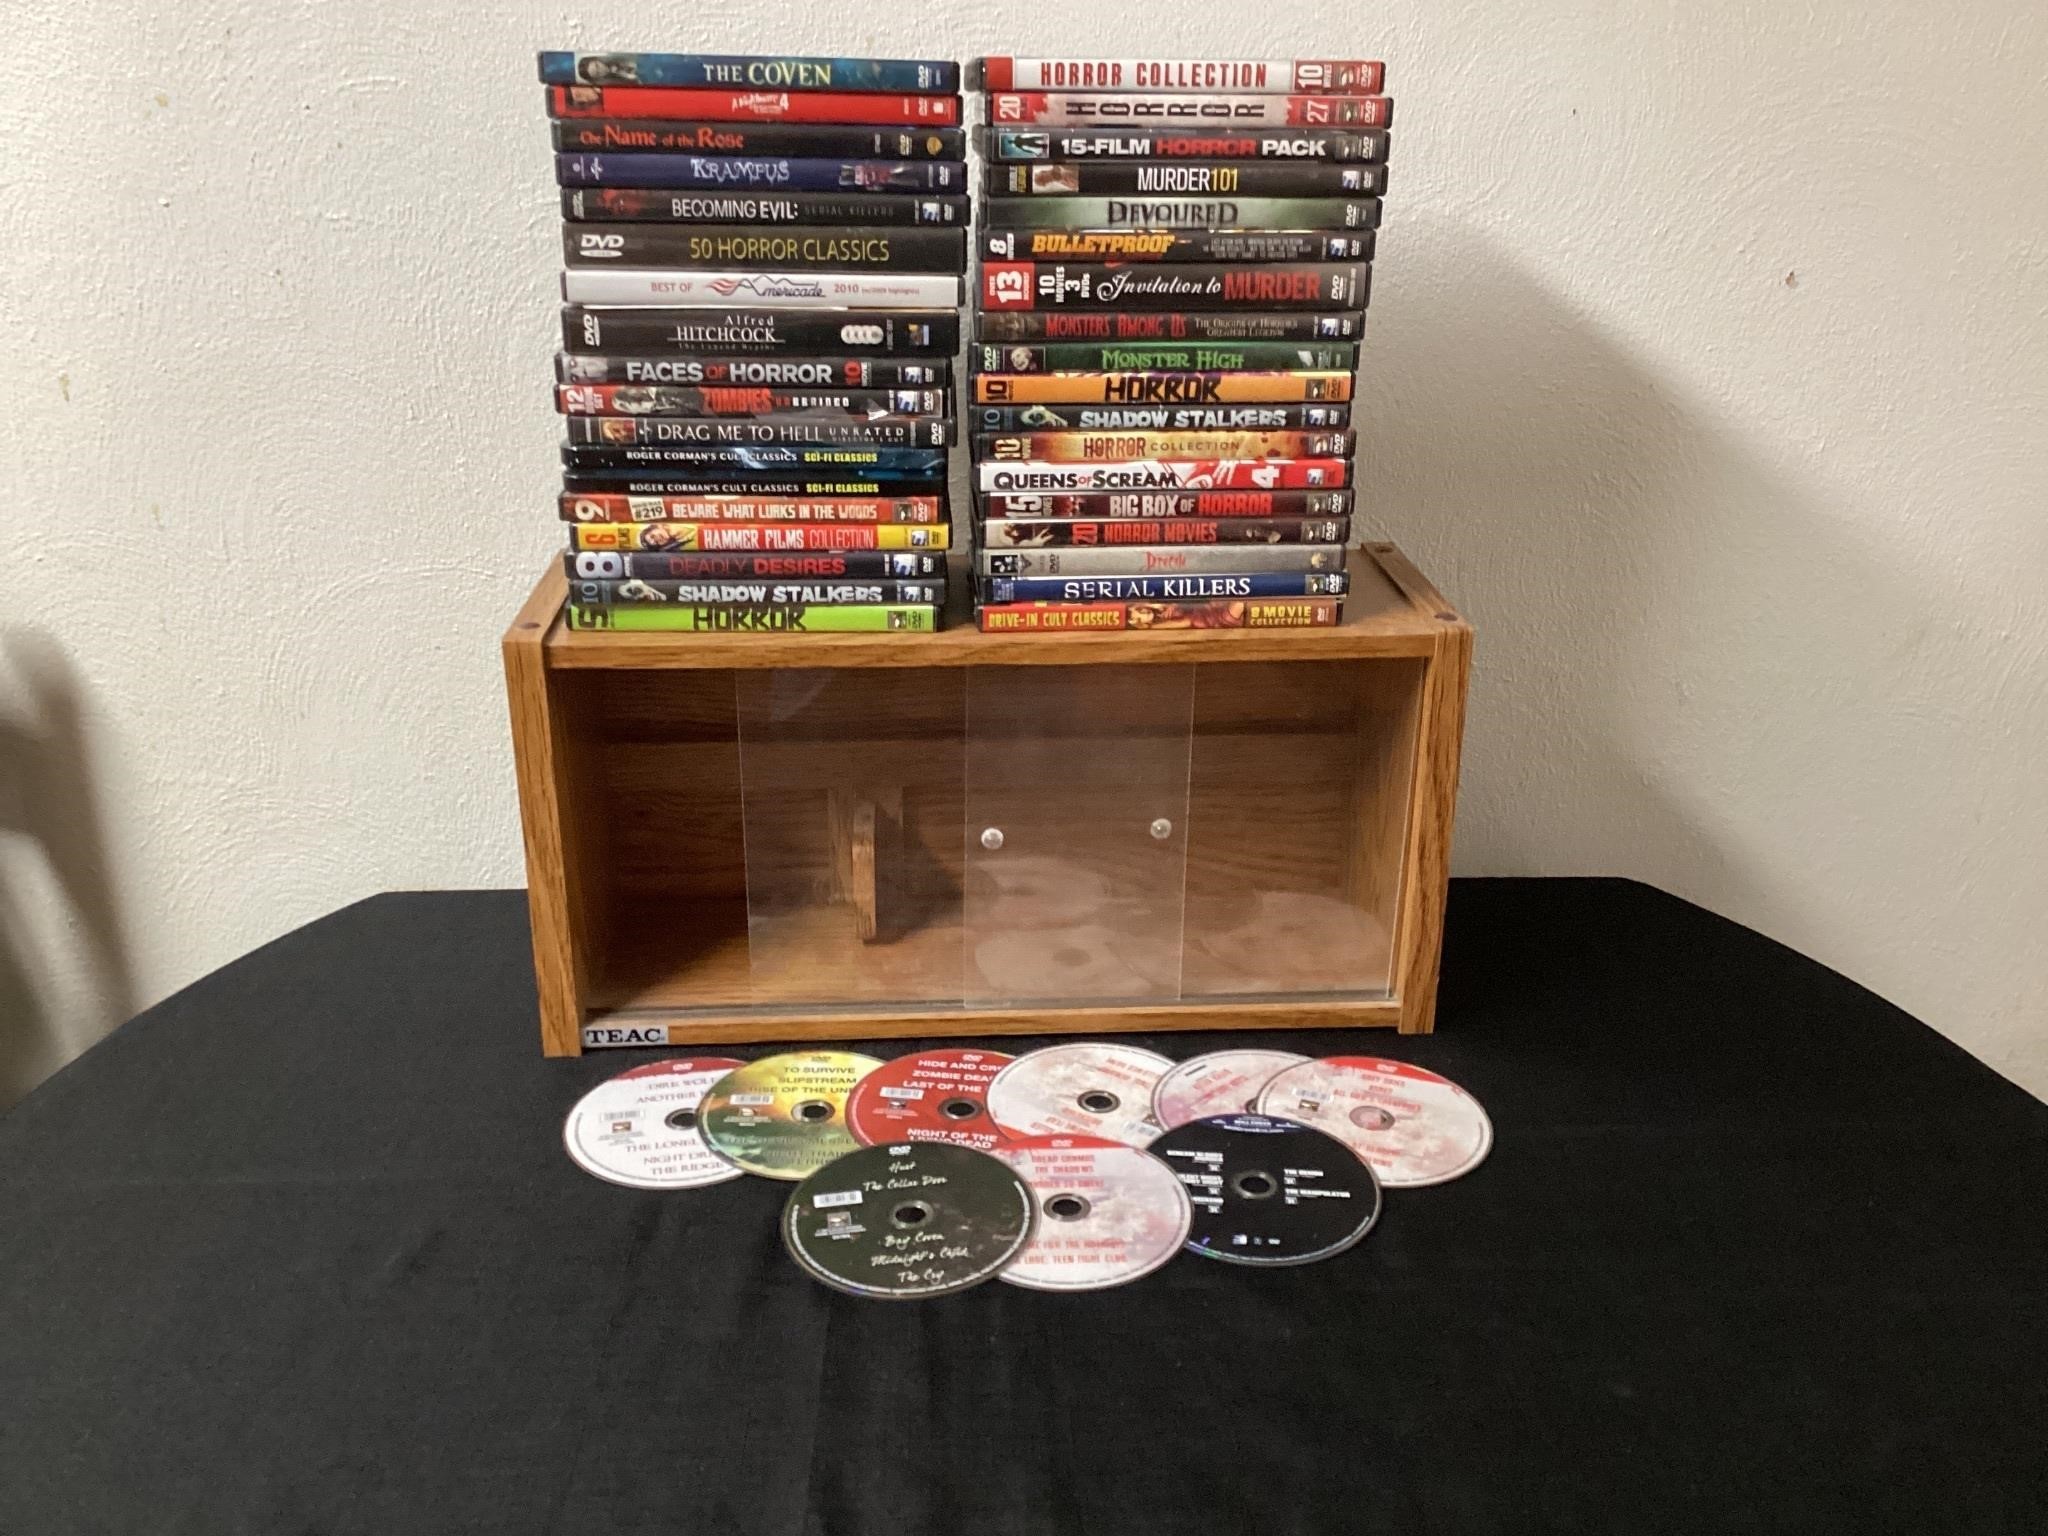 DVD, and cabinet